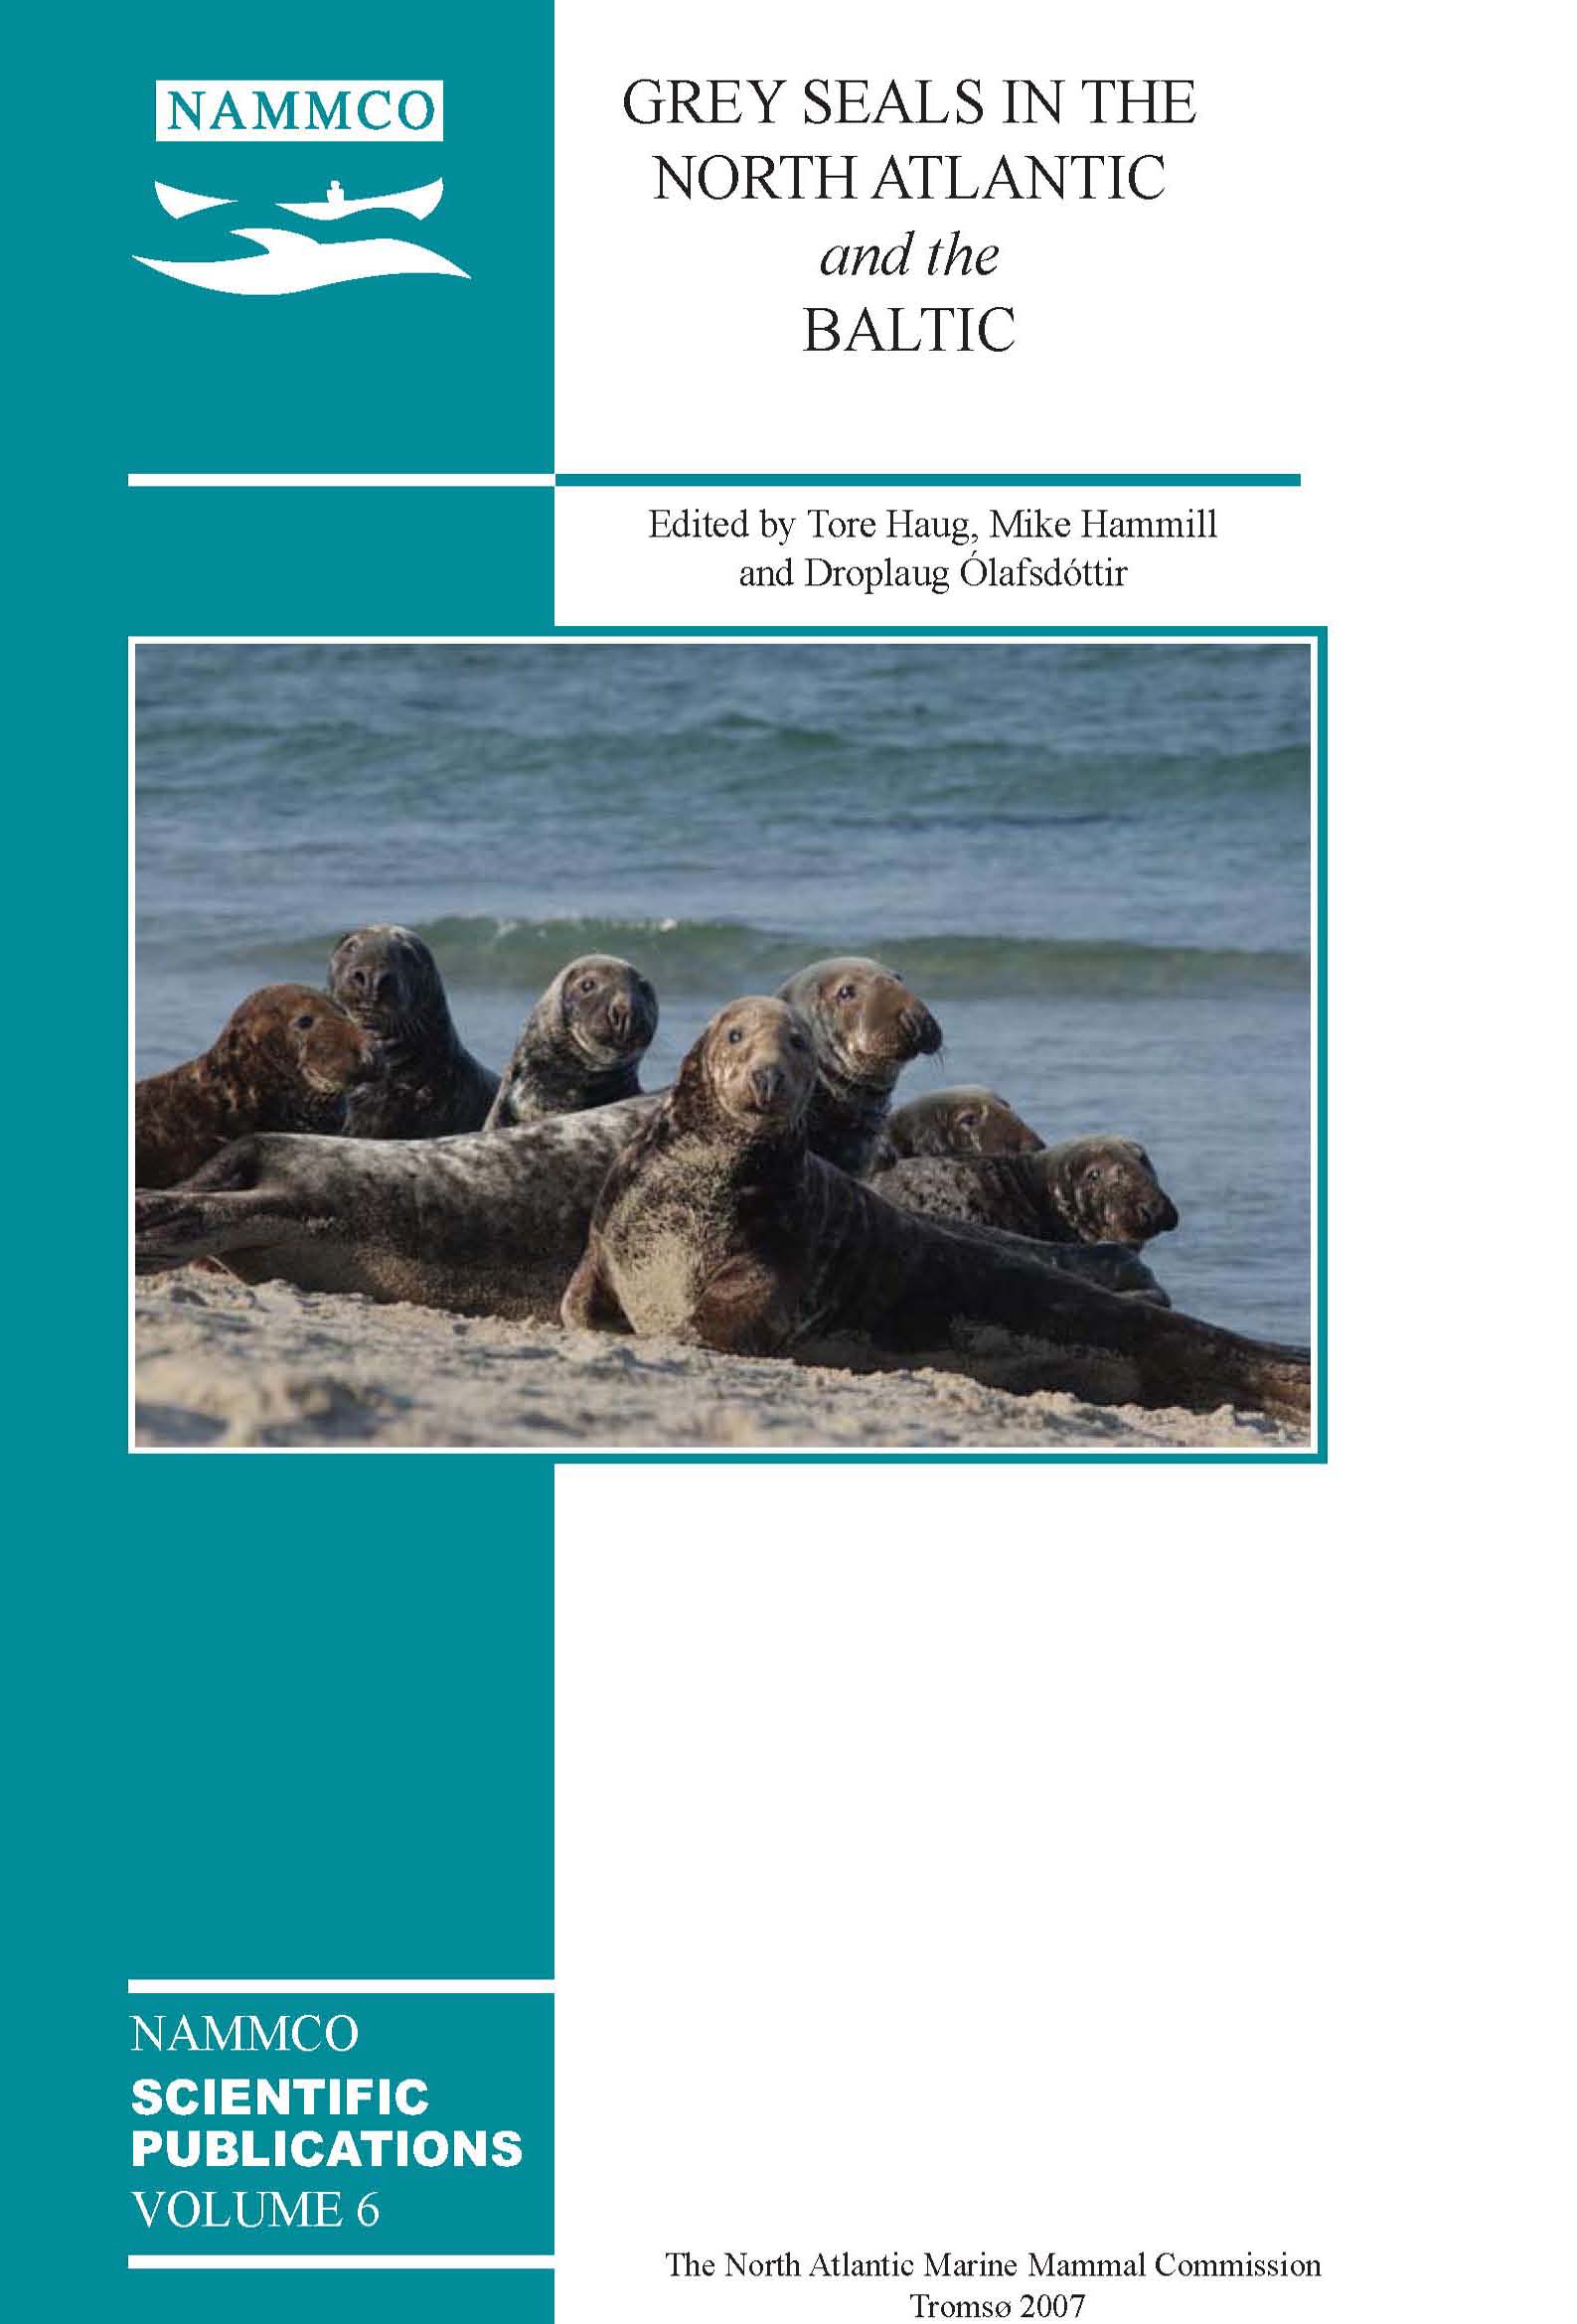 					View Vol. 6: Grey seals in the North Atlantic and the Baltic
				